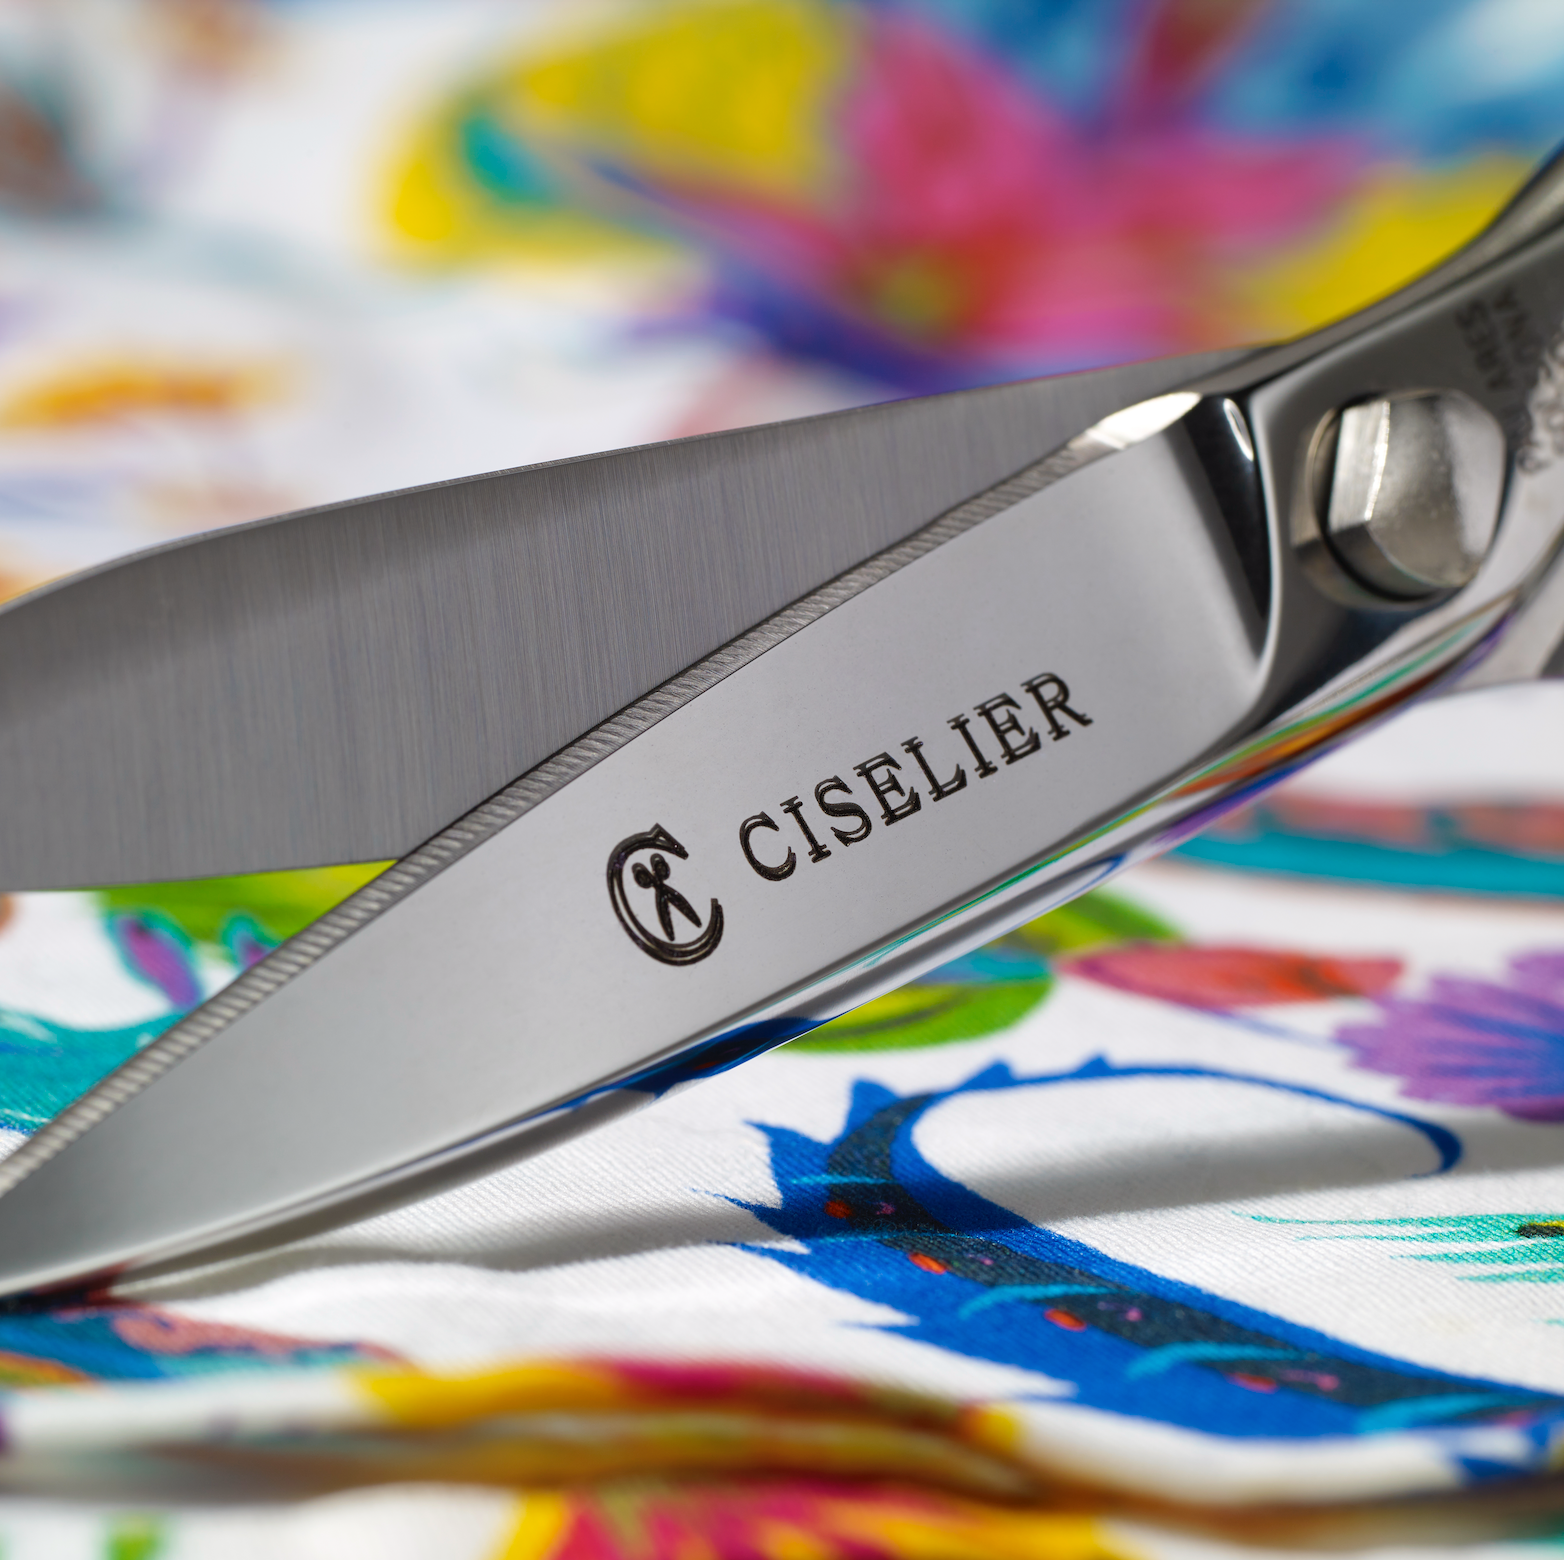 The definitive guide to 32 types of scissors - Ciselier Company